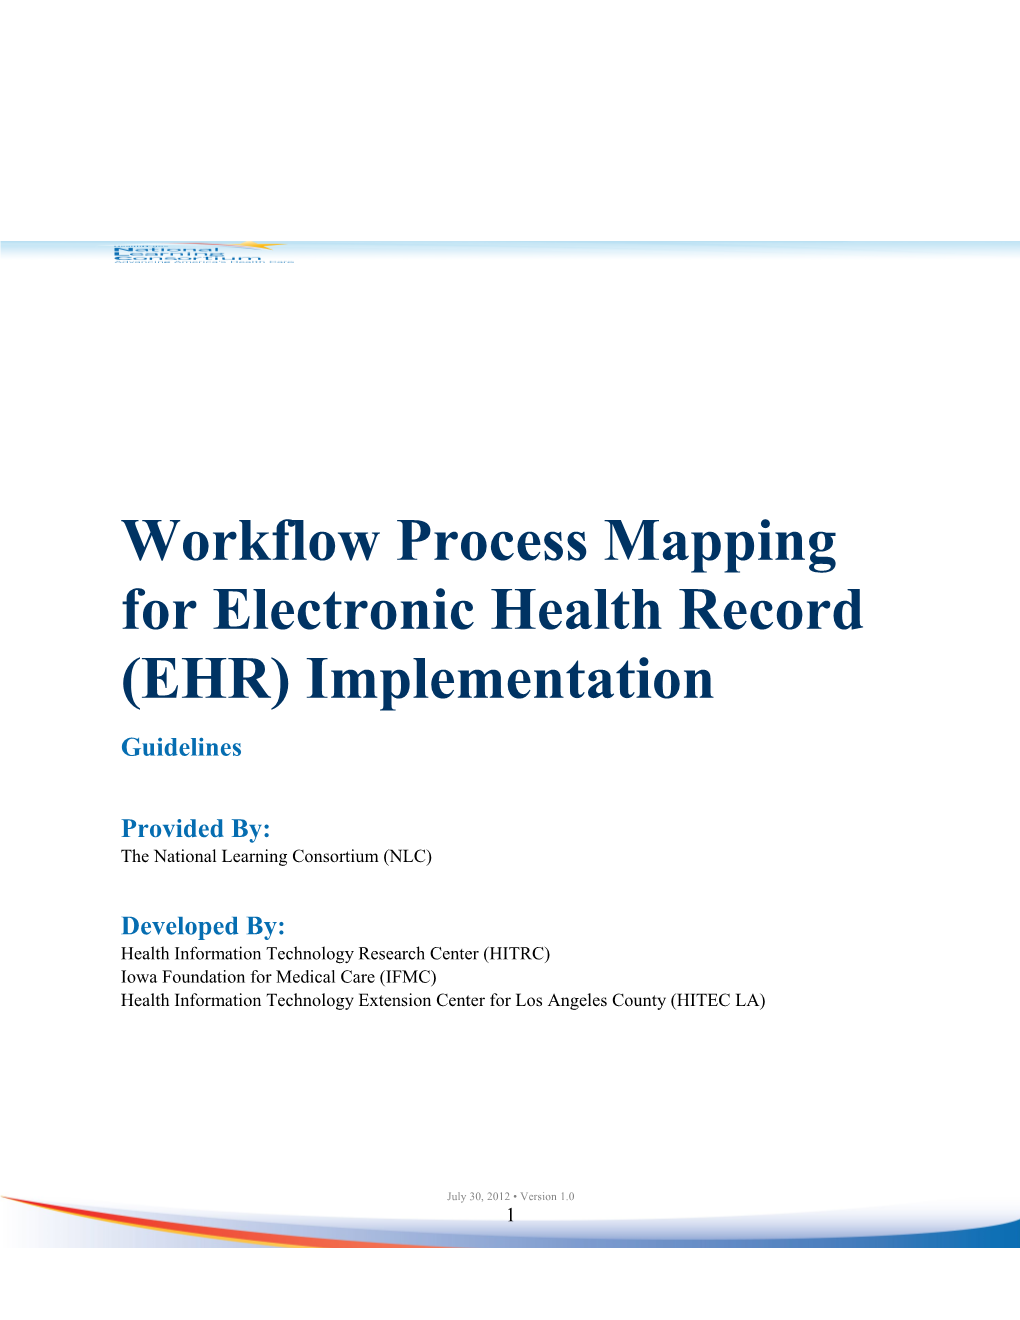 Workflow Process Mapping for Electronic Health Record (EHR) Implementation